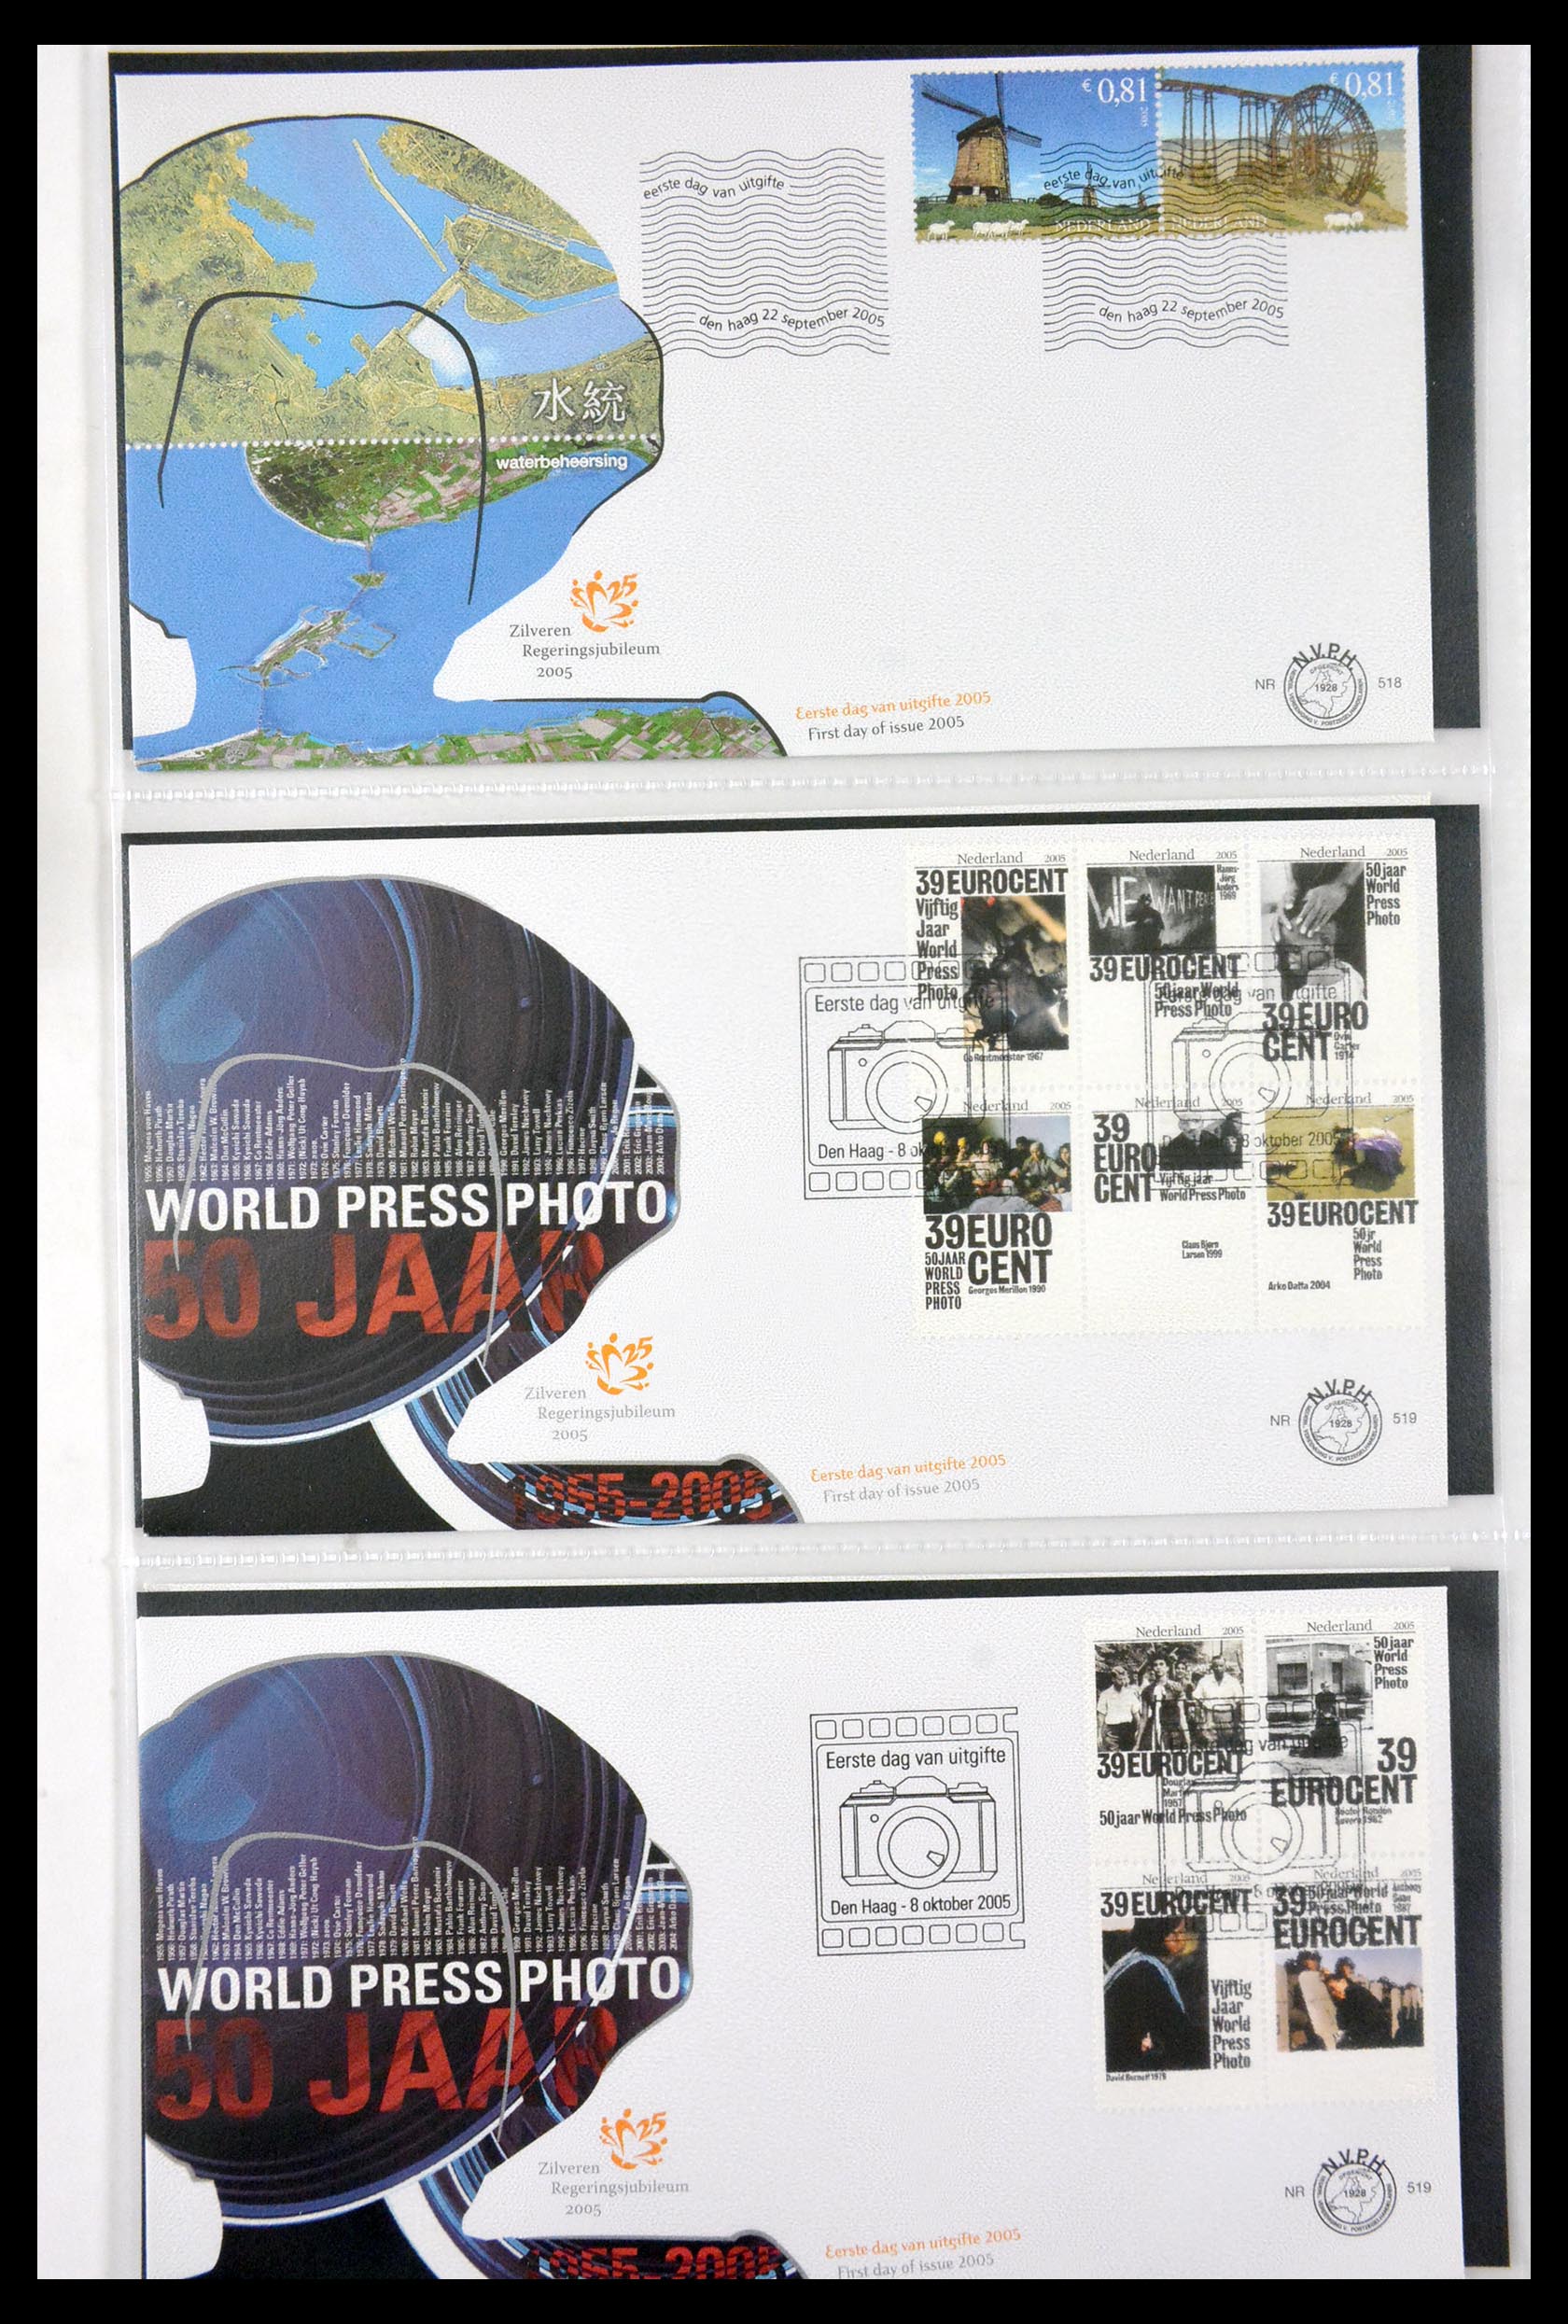 29850 036 - 29850 Netherlands FDC's 2001-2012.